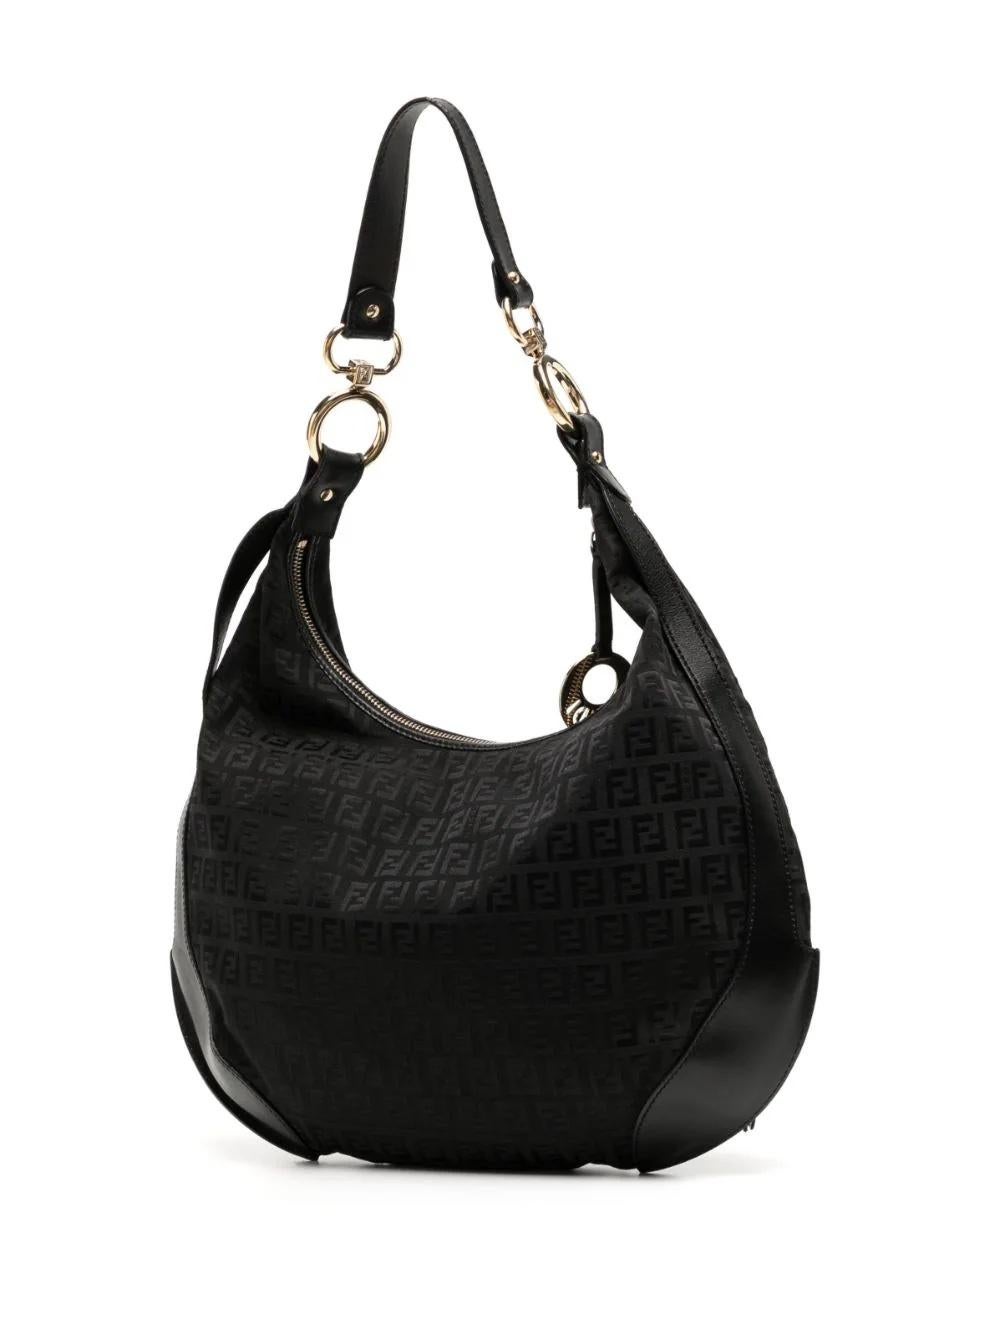 This distinctive Fendi Zucchino monogram pattern in canvas with leather details is present in this medium-sized hobo bag. Boasting a single shoulder strap, external pocket, golden logo charm, and golden hardware, it is both stylish and practical.